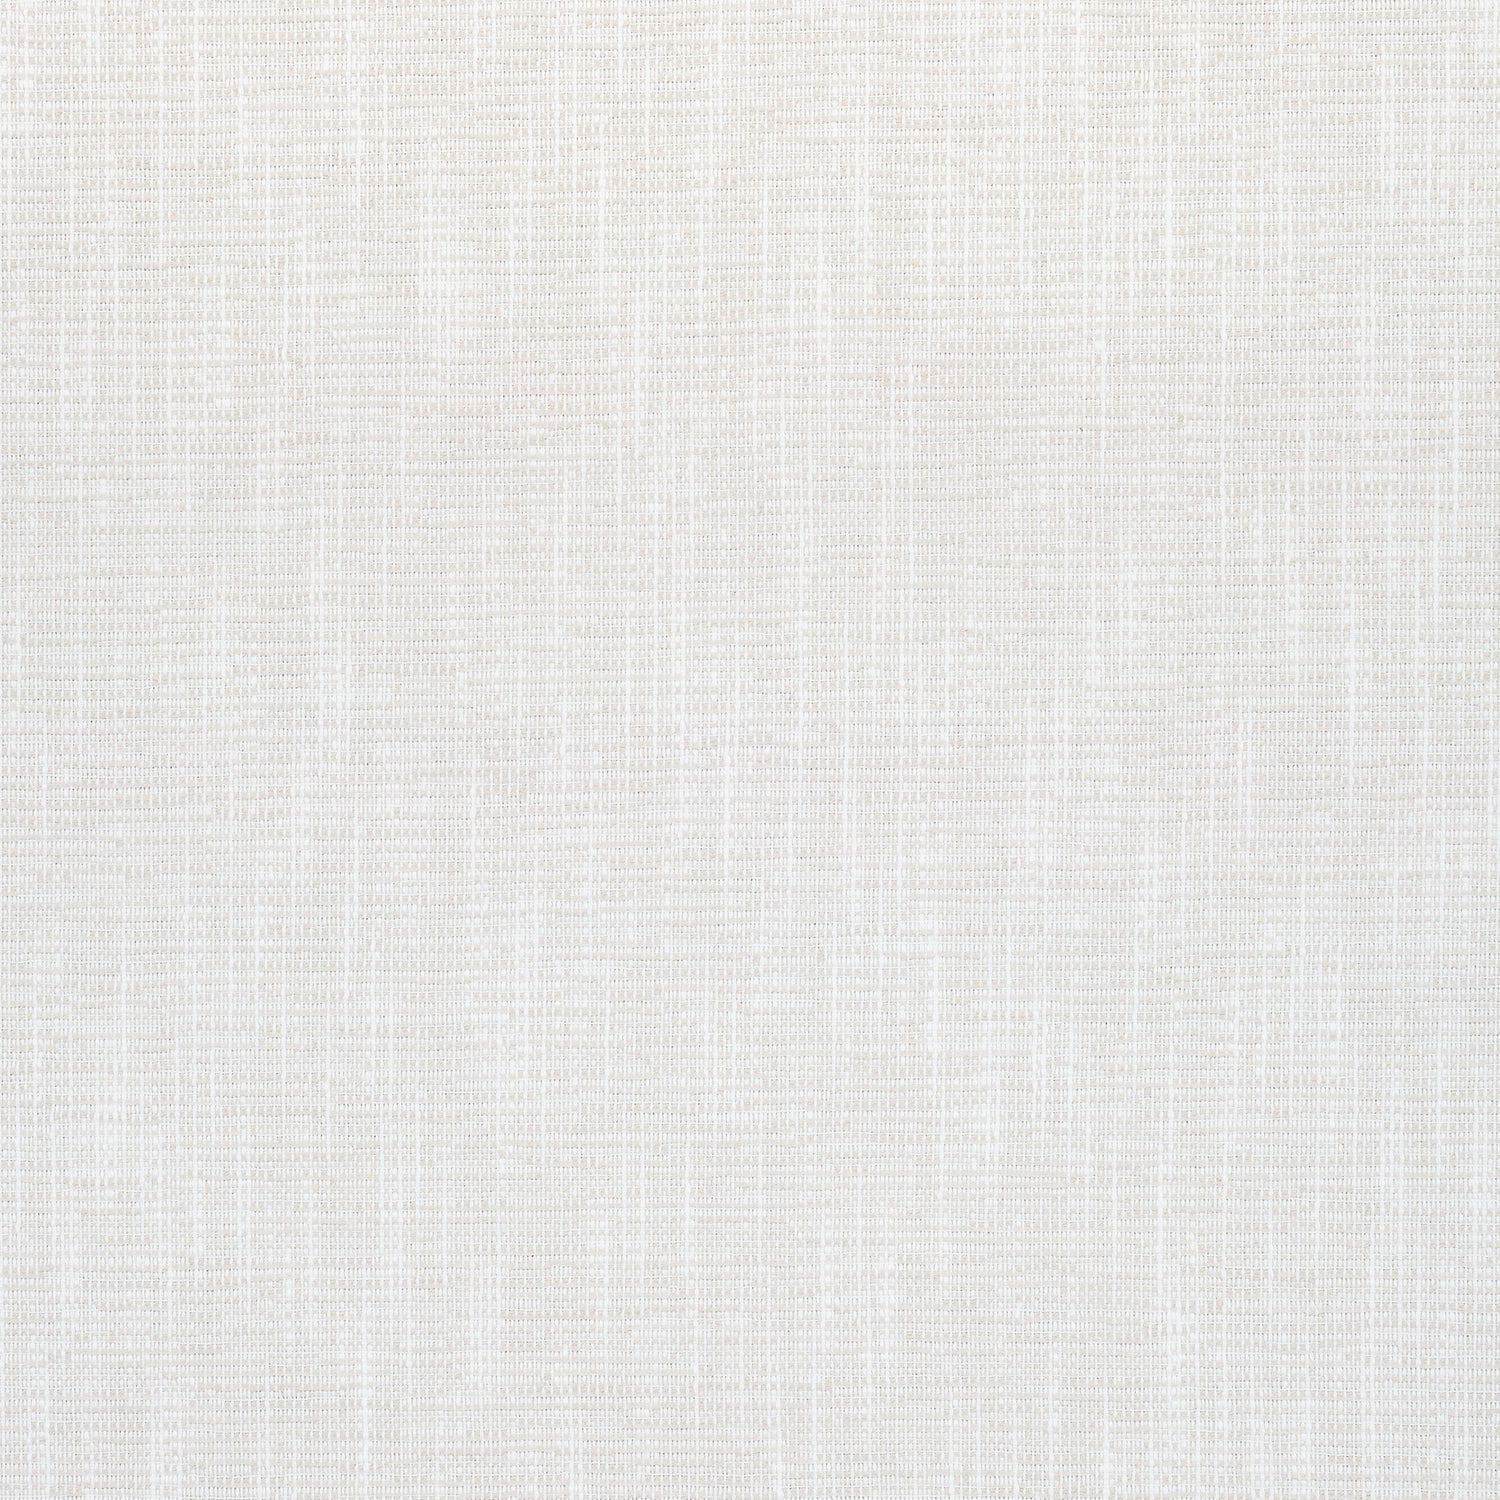 Piper fabric in flax color - pattern number W73440 - by Thibaut in the Landmark Textures collection